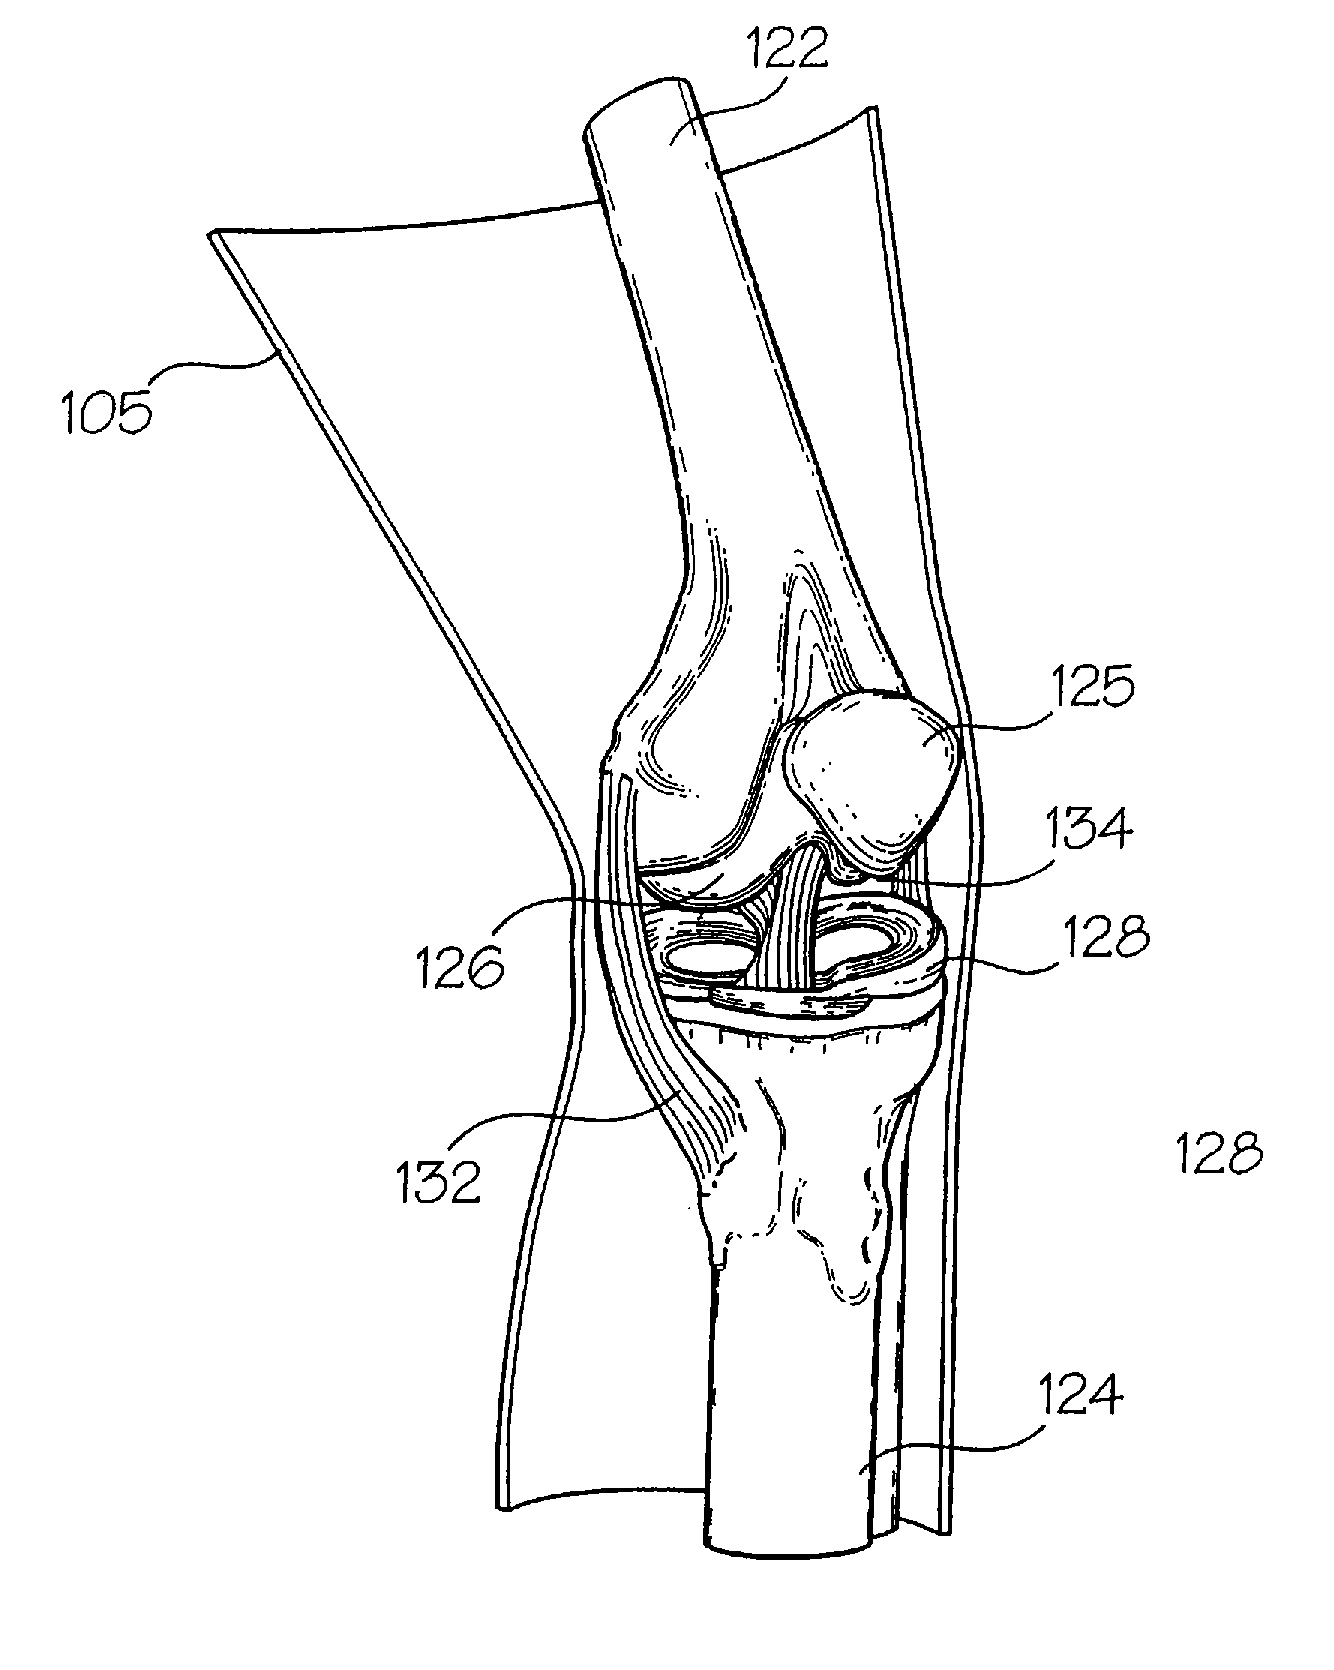 Joint Replica Models and Methods of Using Same for Testing Medical Devices